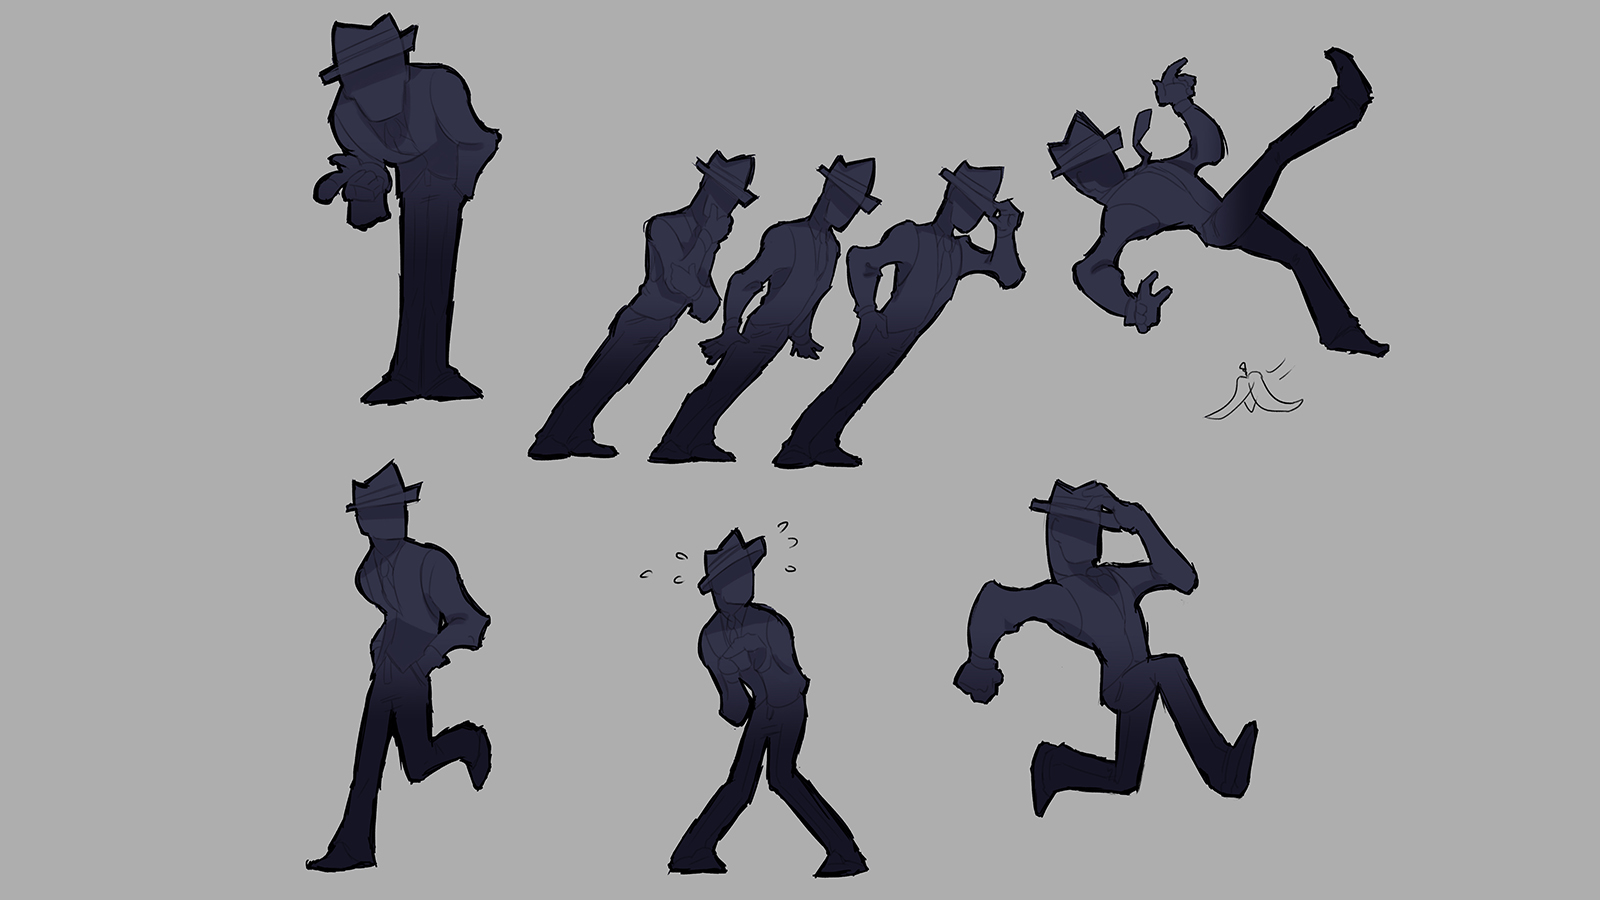 Several different action poses for a goon character.